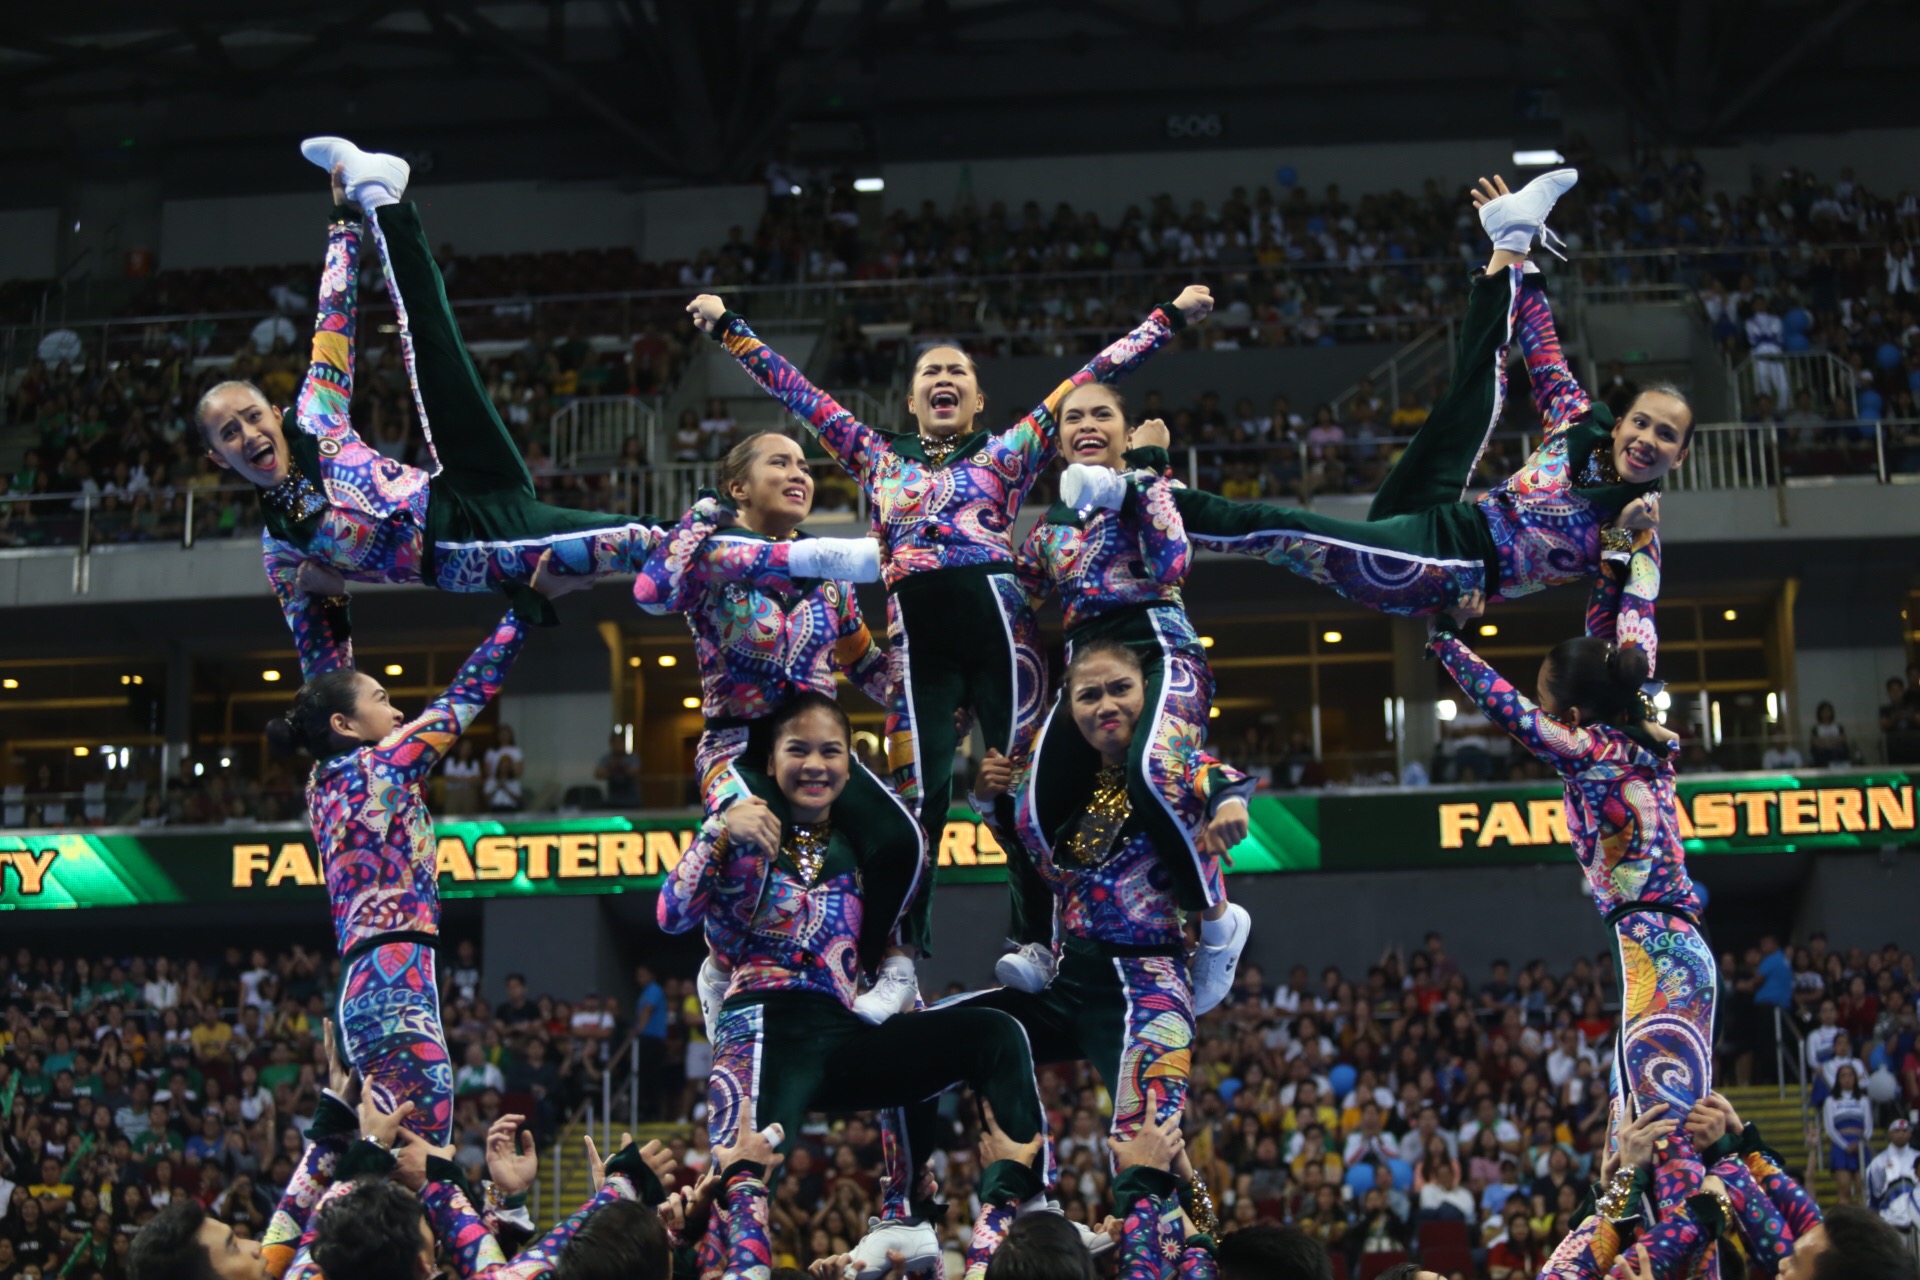 THROWBACK. The FEU Cheering Squad turns back time with a funky '70s show. Photo by Josh Albelda/Rappler  